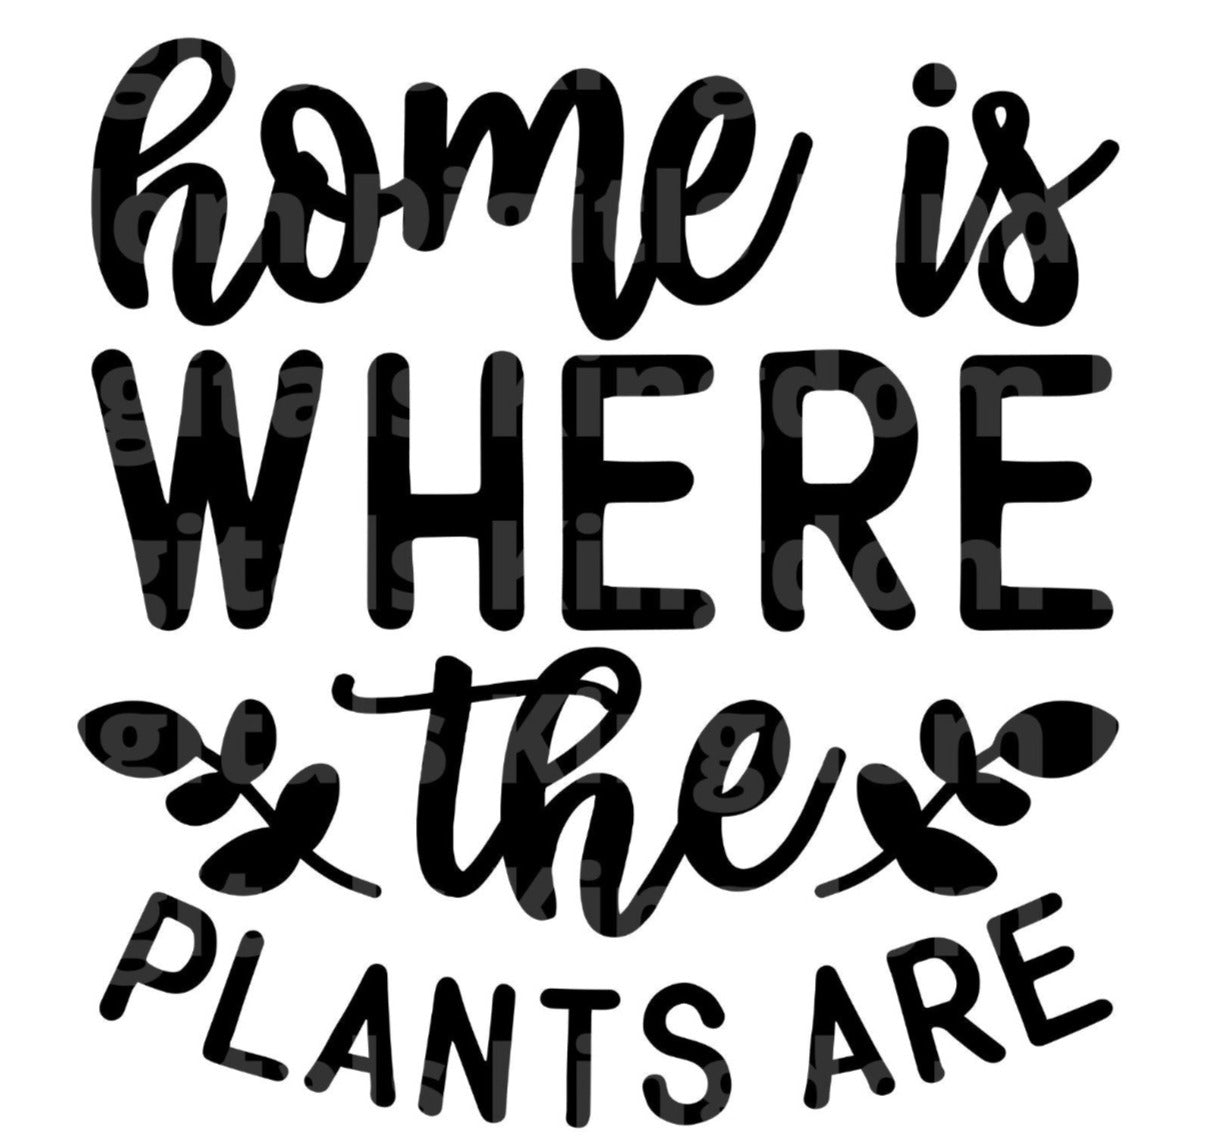 Home Is Where The Plants Are SVG Cut File